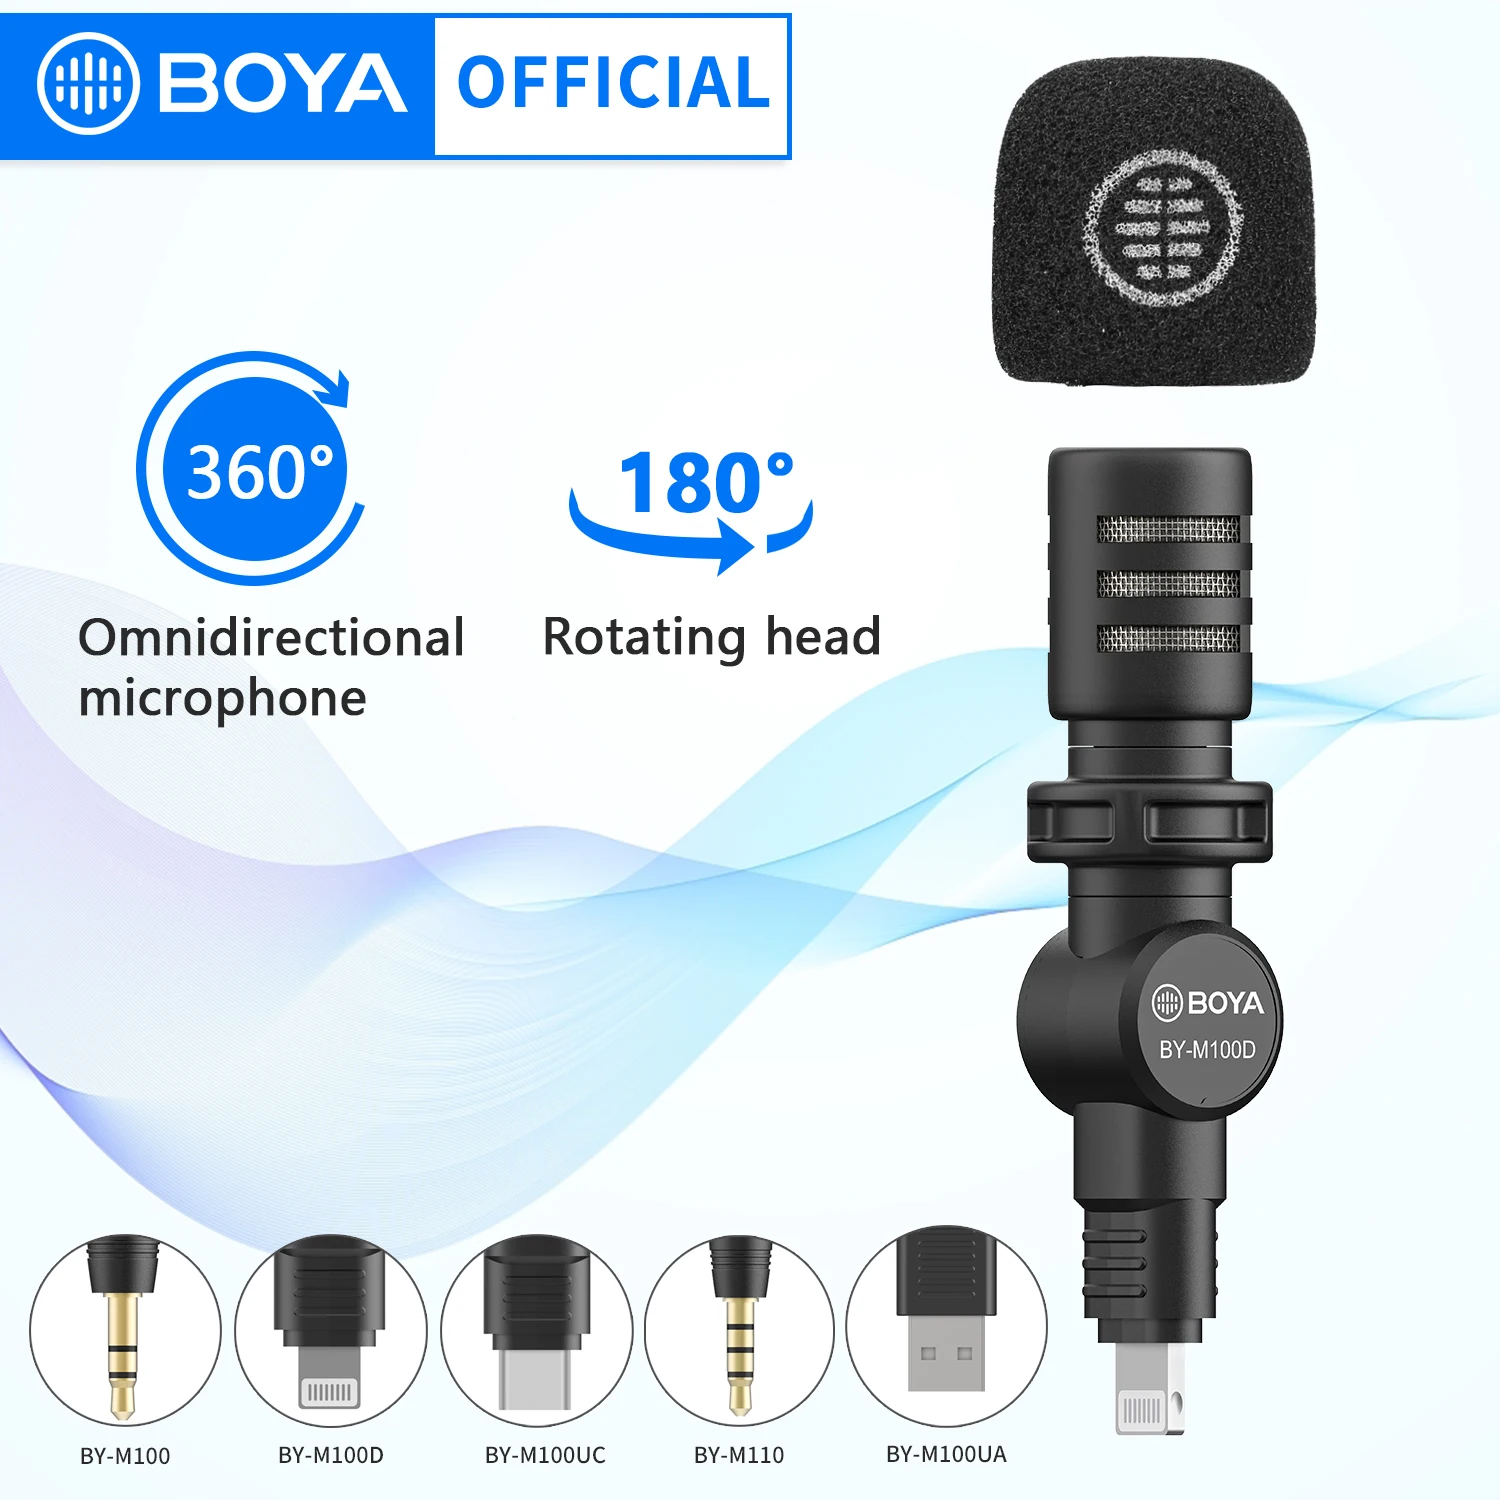 

BOYA BY-M100 Wireless Microphone Lavalier Portable Audio Video Recording Mini Mic for iPhon Android Live Game Smart Phone Camera